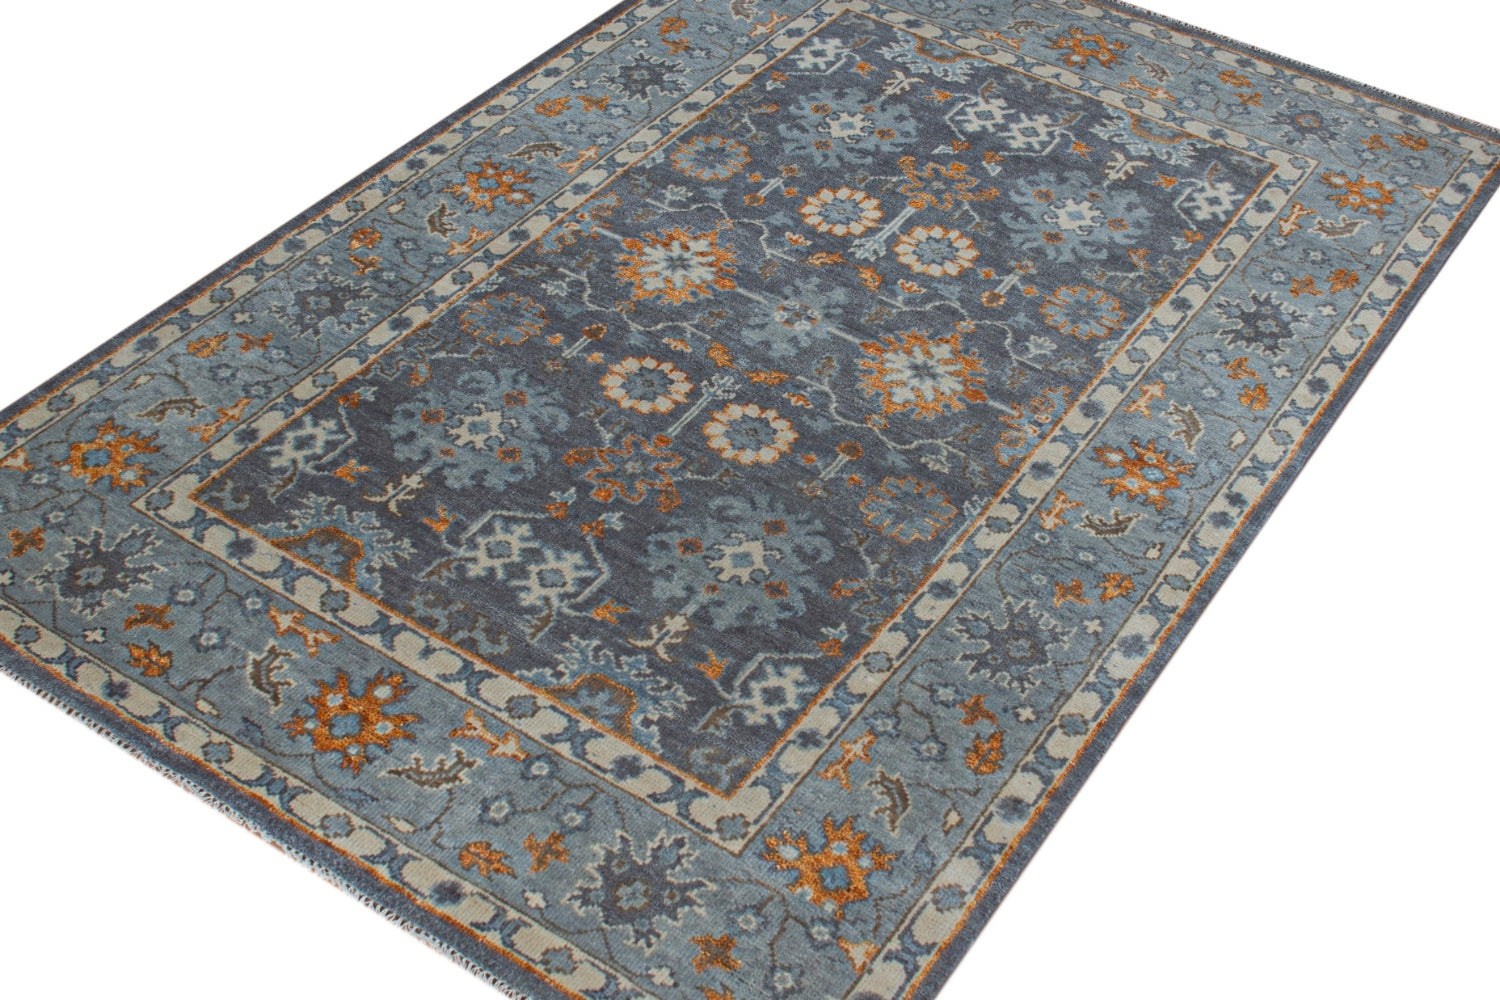 Sultanabad 7 Handwoven Traditional Rug, J71644